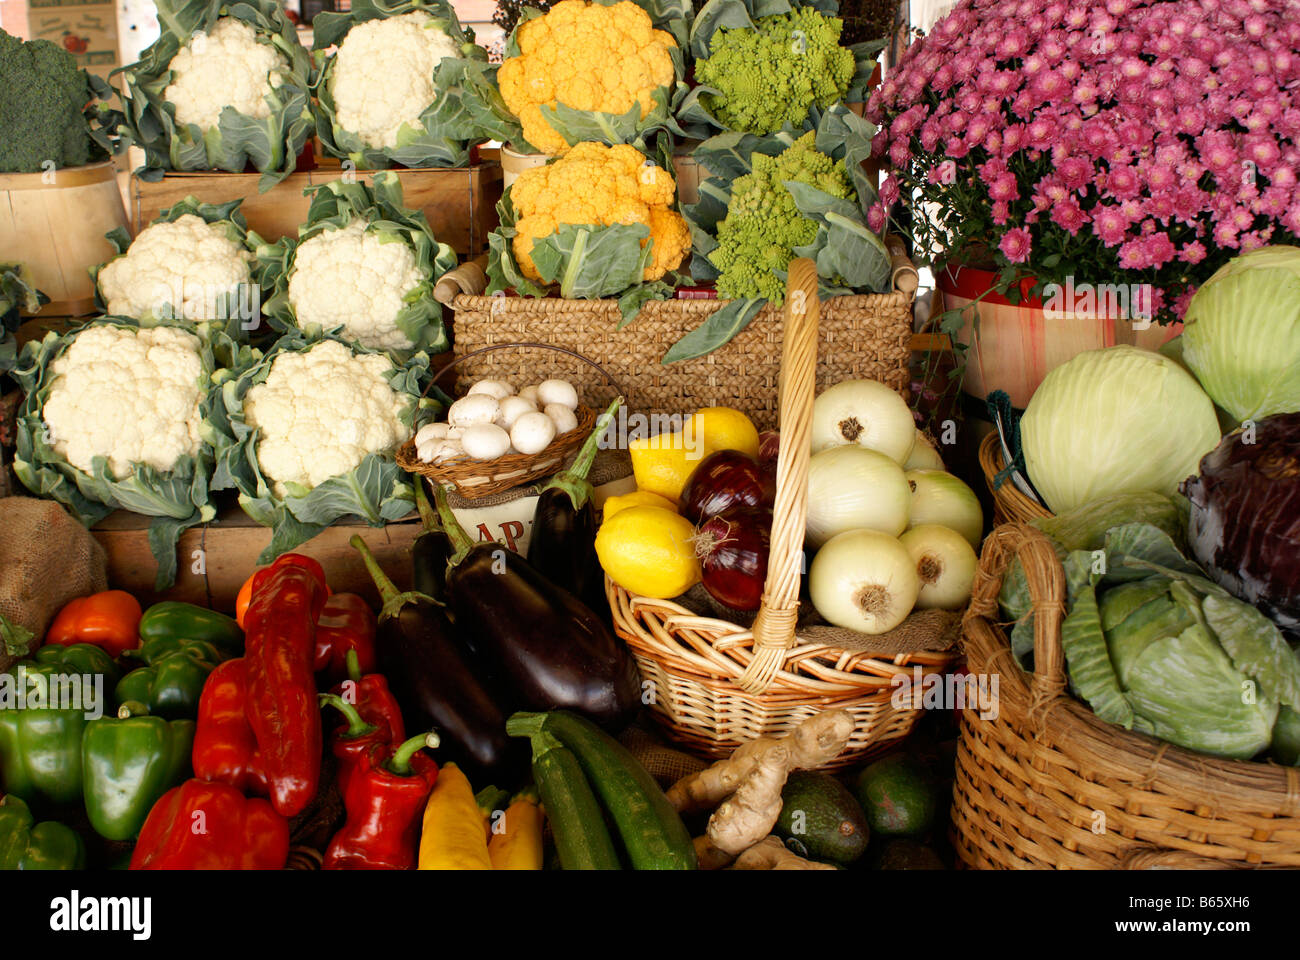 baskets-of-fresh-vegetables-for-sale-in-